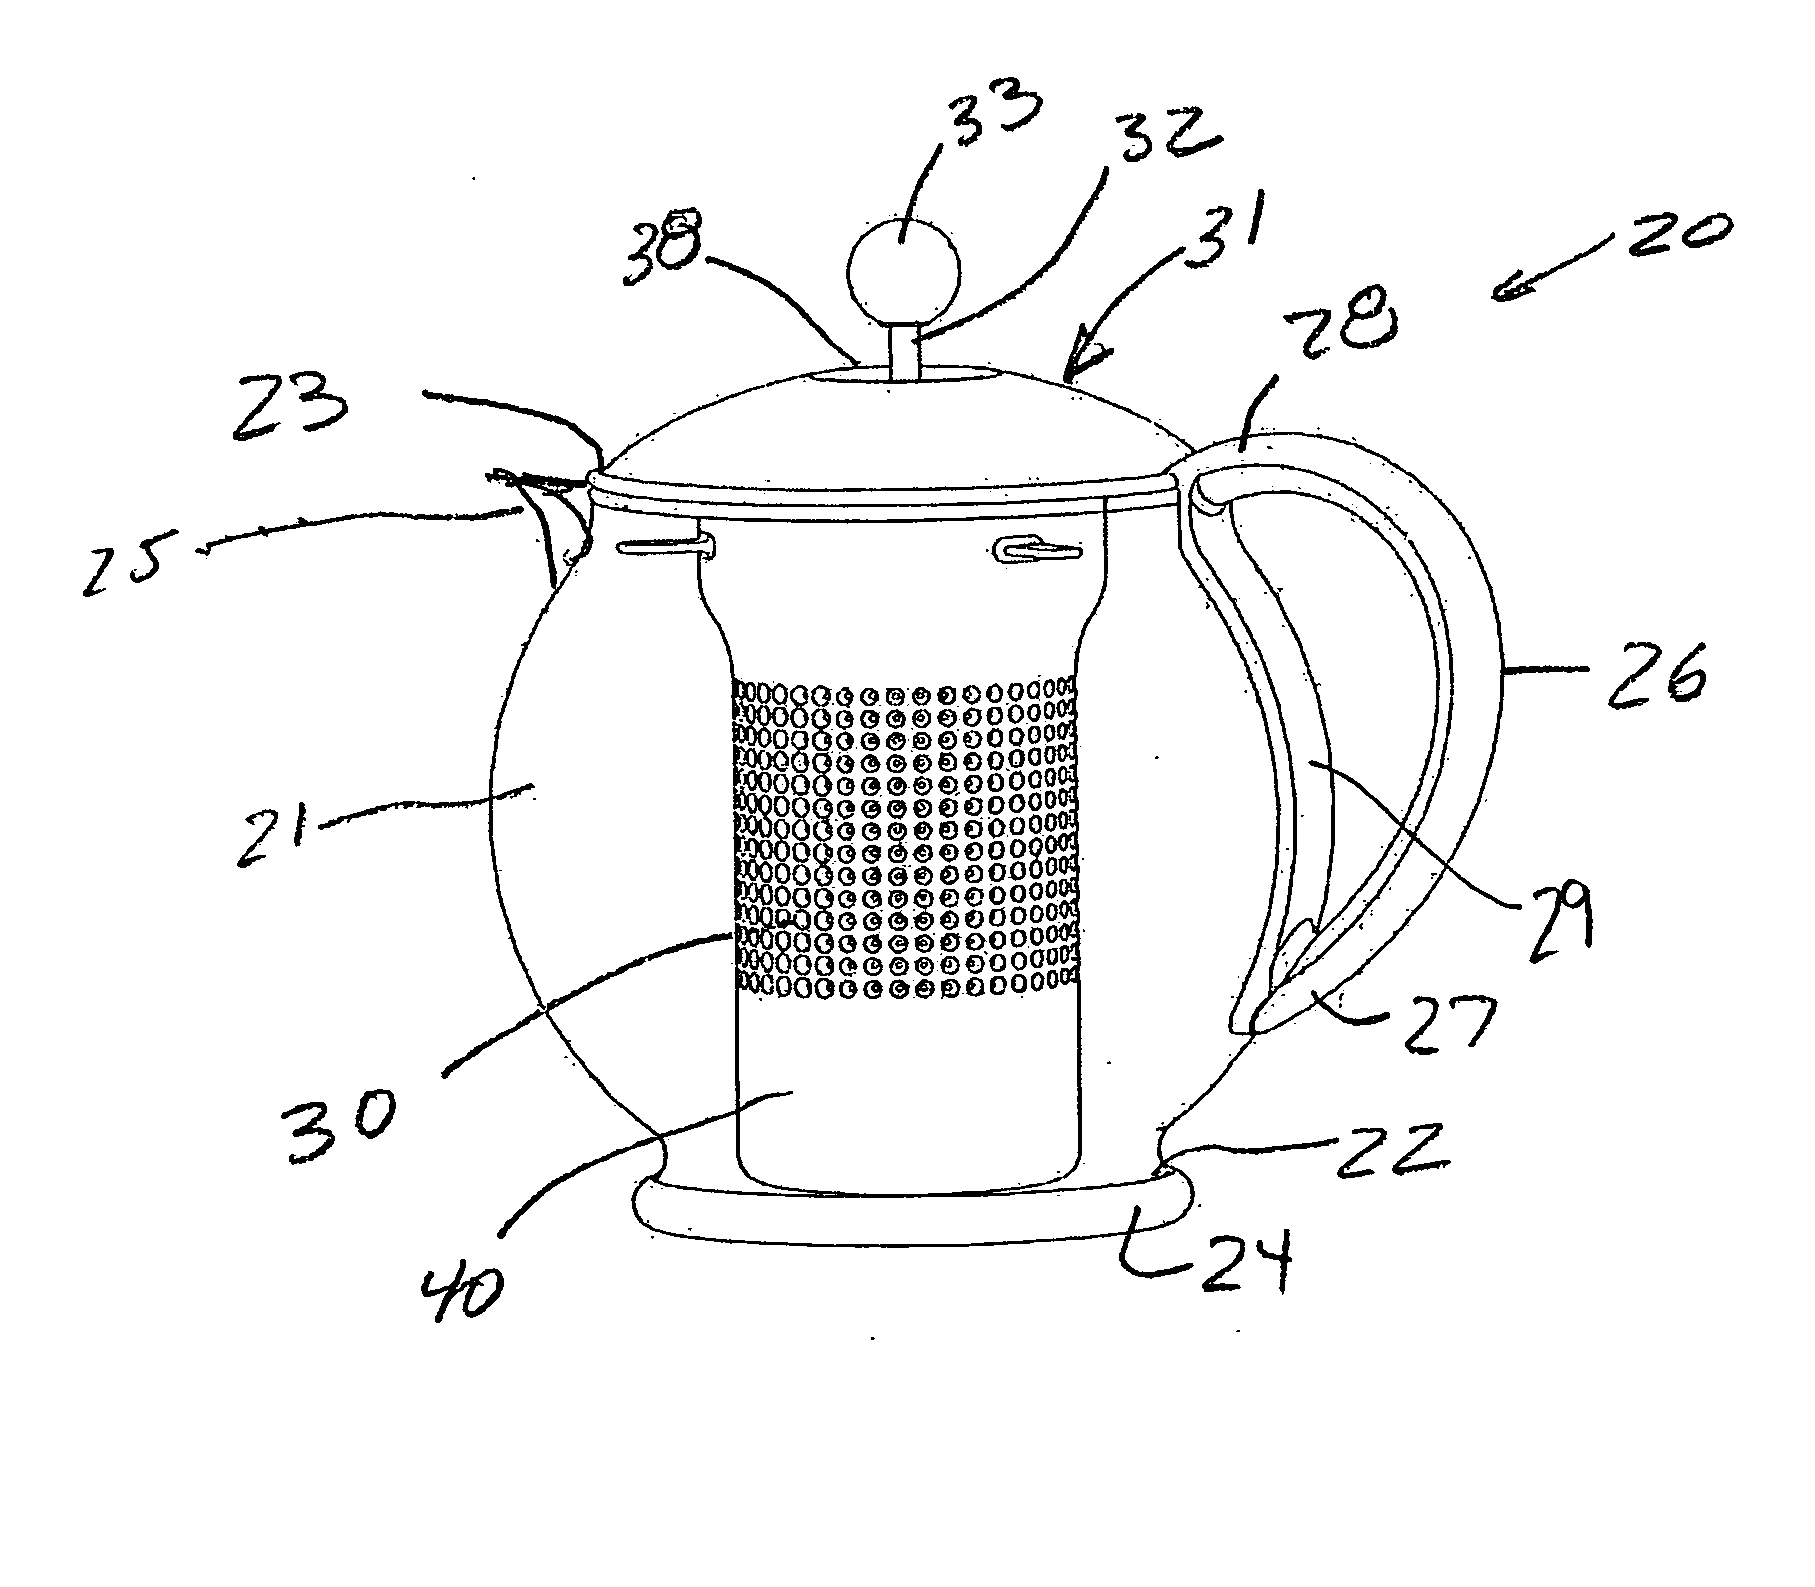 Infusion beverage brewing system